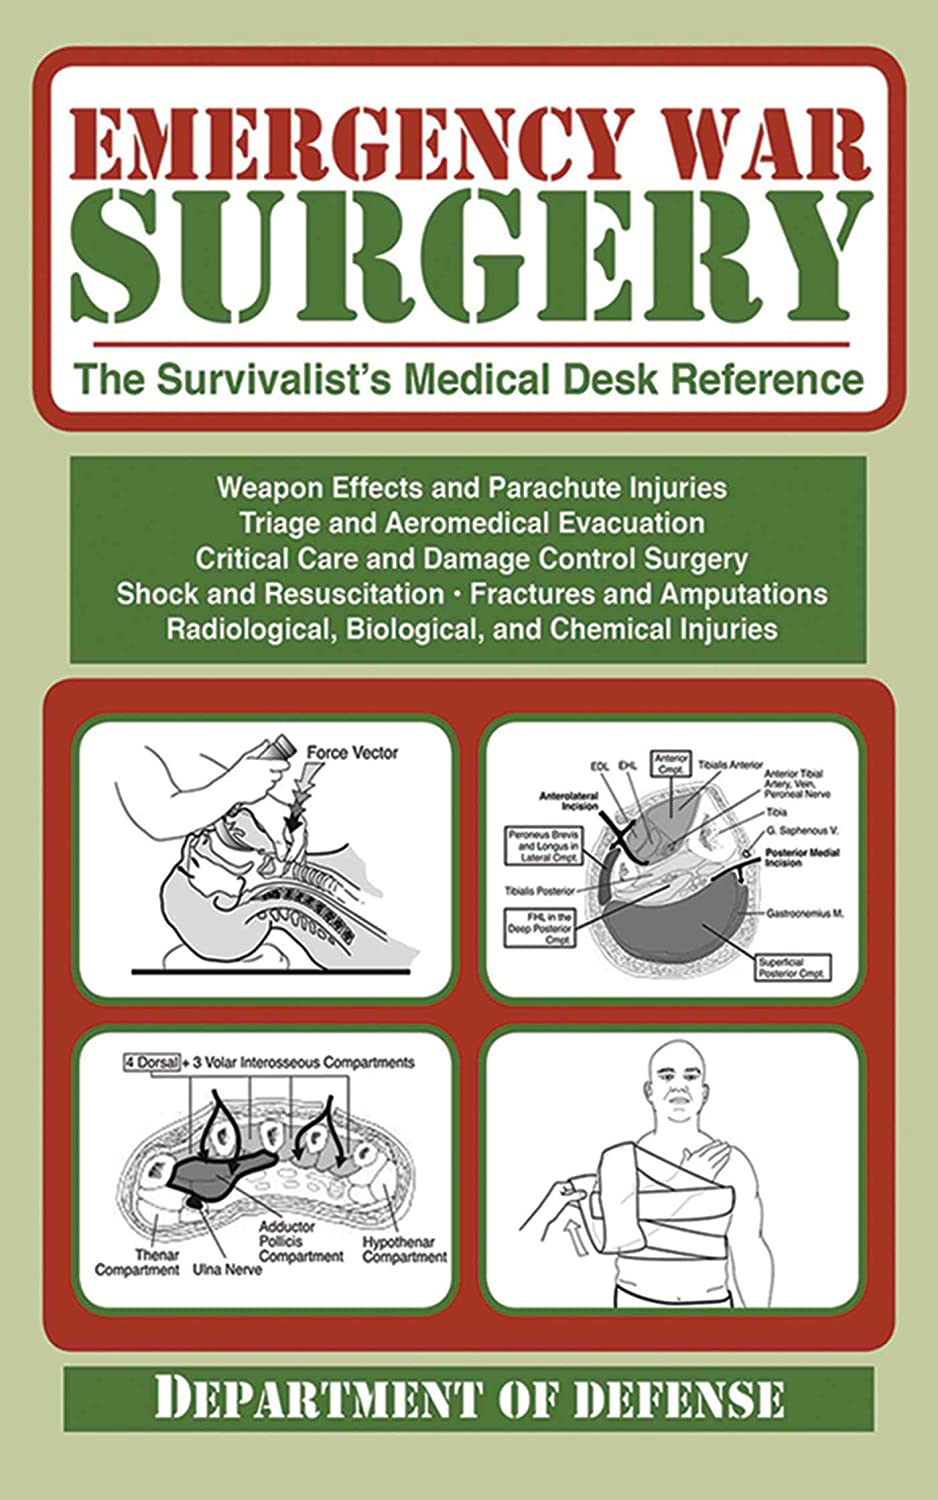 Emergency War Surgery: The Survivalist’s Medical Desk Reference